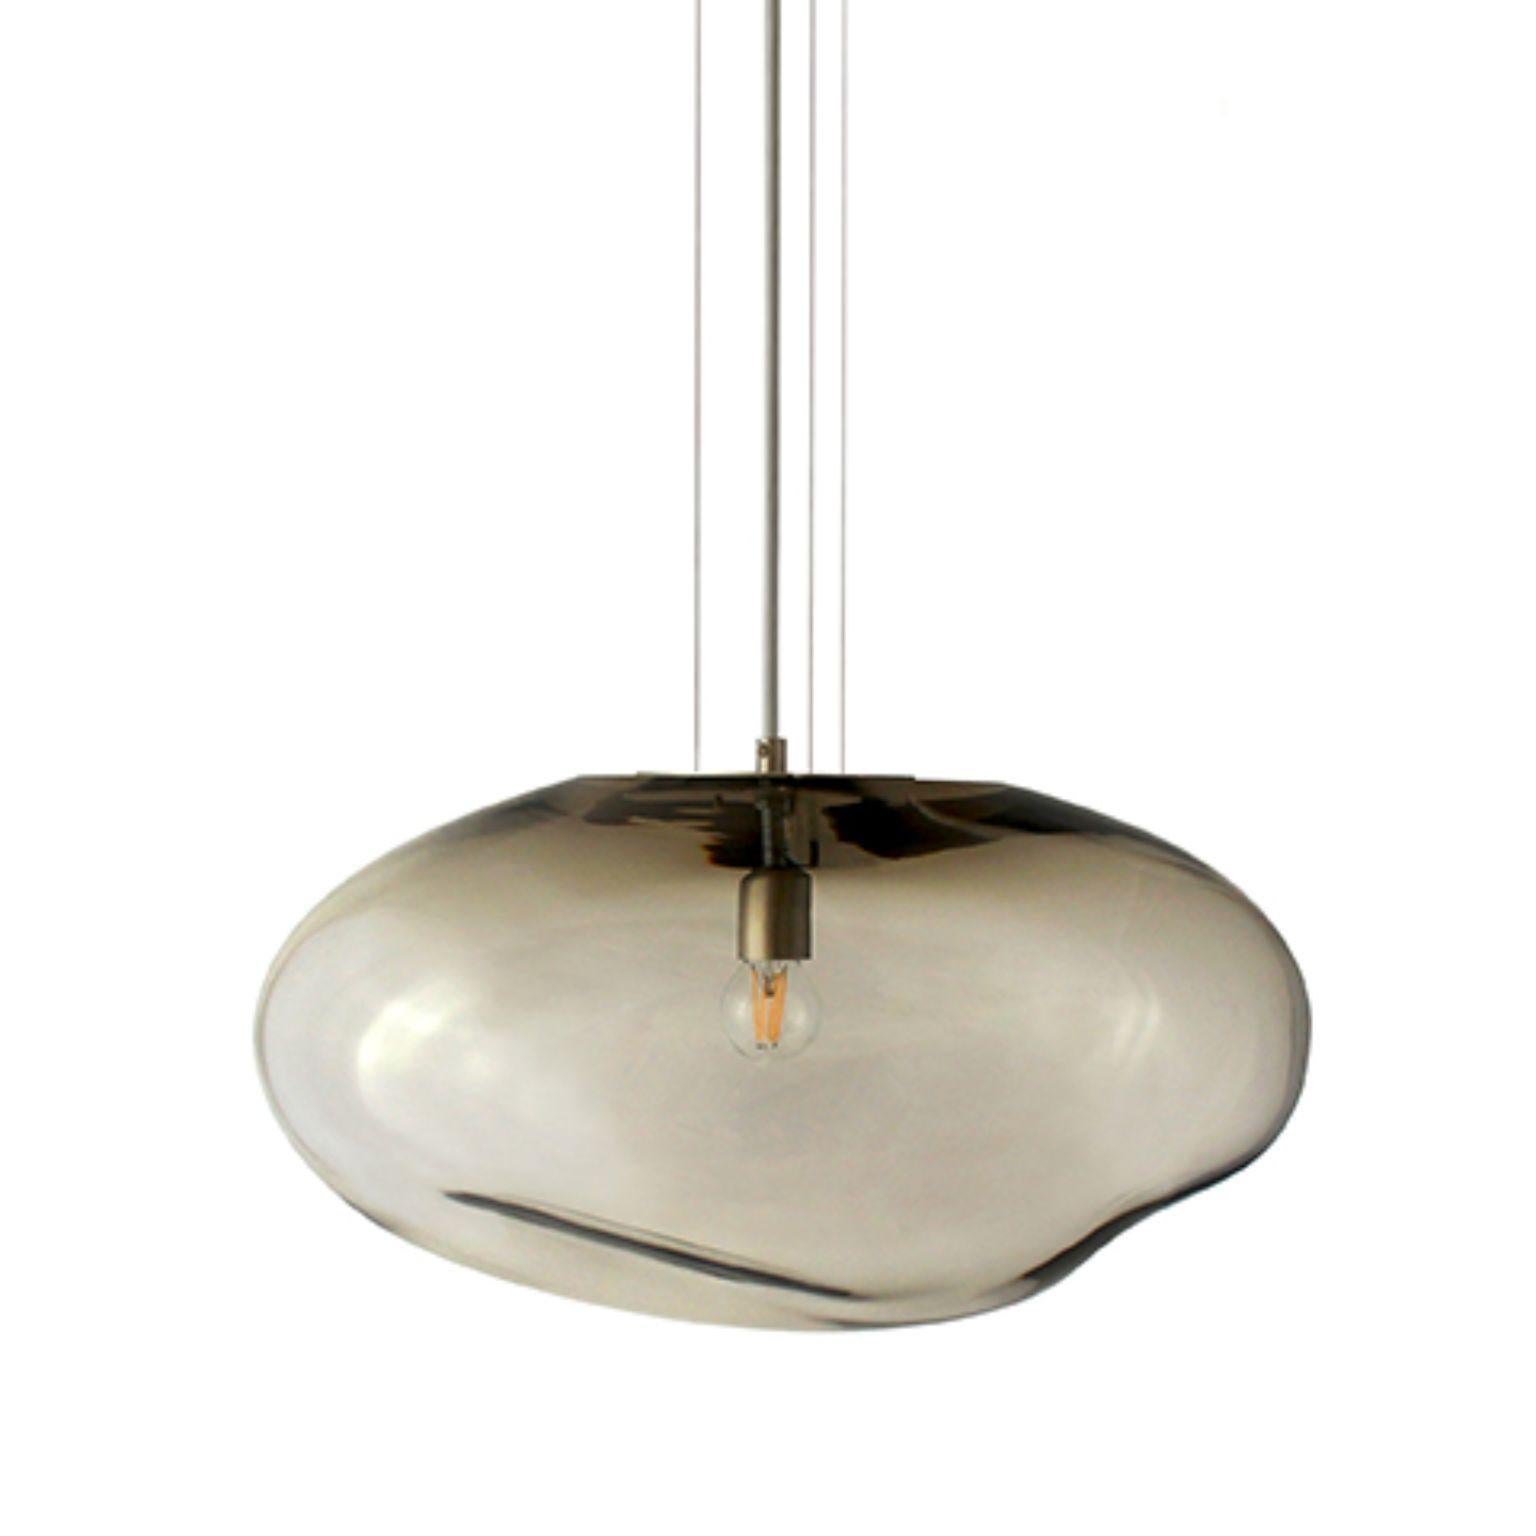 Haumea Amorph silver smoke L pendant by Eloa.
No UL listed 
Material: Glass, steel, silver, LED Bulb.
Dimensions: D 27 x W 39 x H 30 cm.
Also available in different colours and dimensions.

All our lamps can be wired according to each country. If